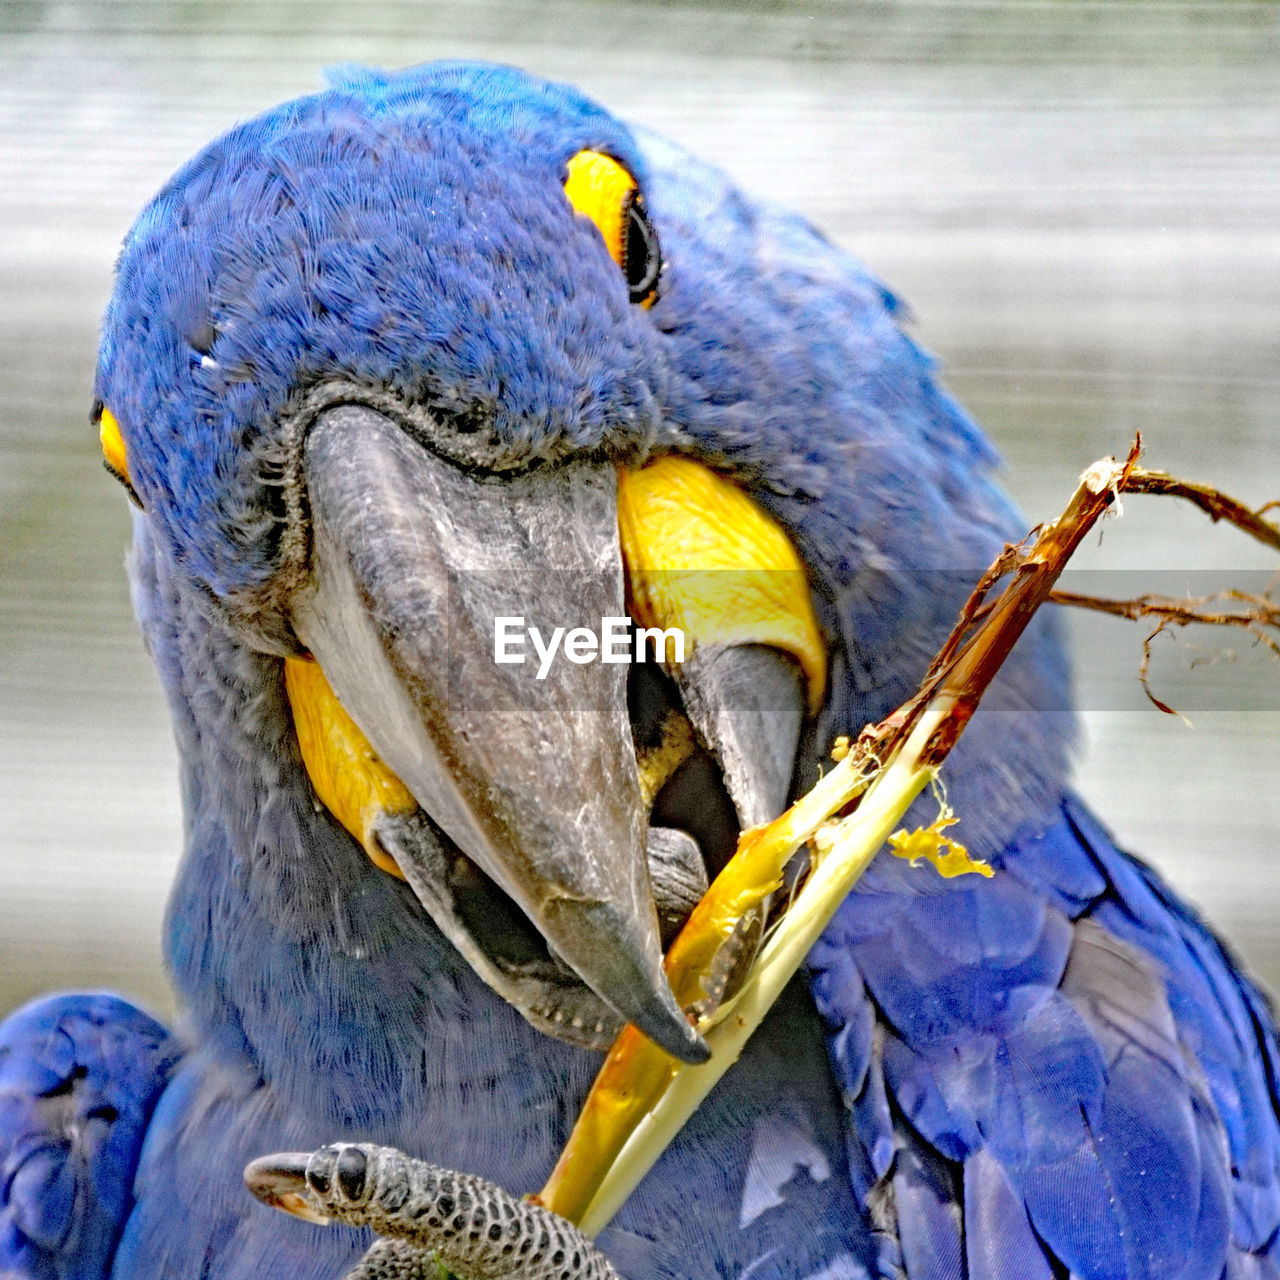 CLOSE-UP OF A PARROT EATING